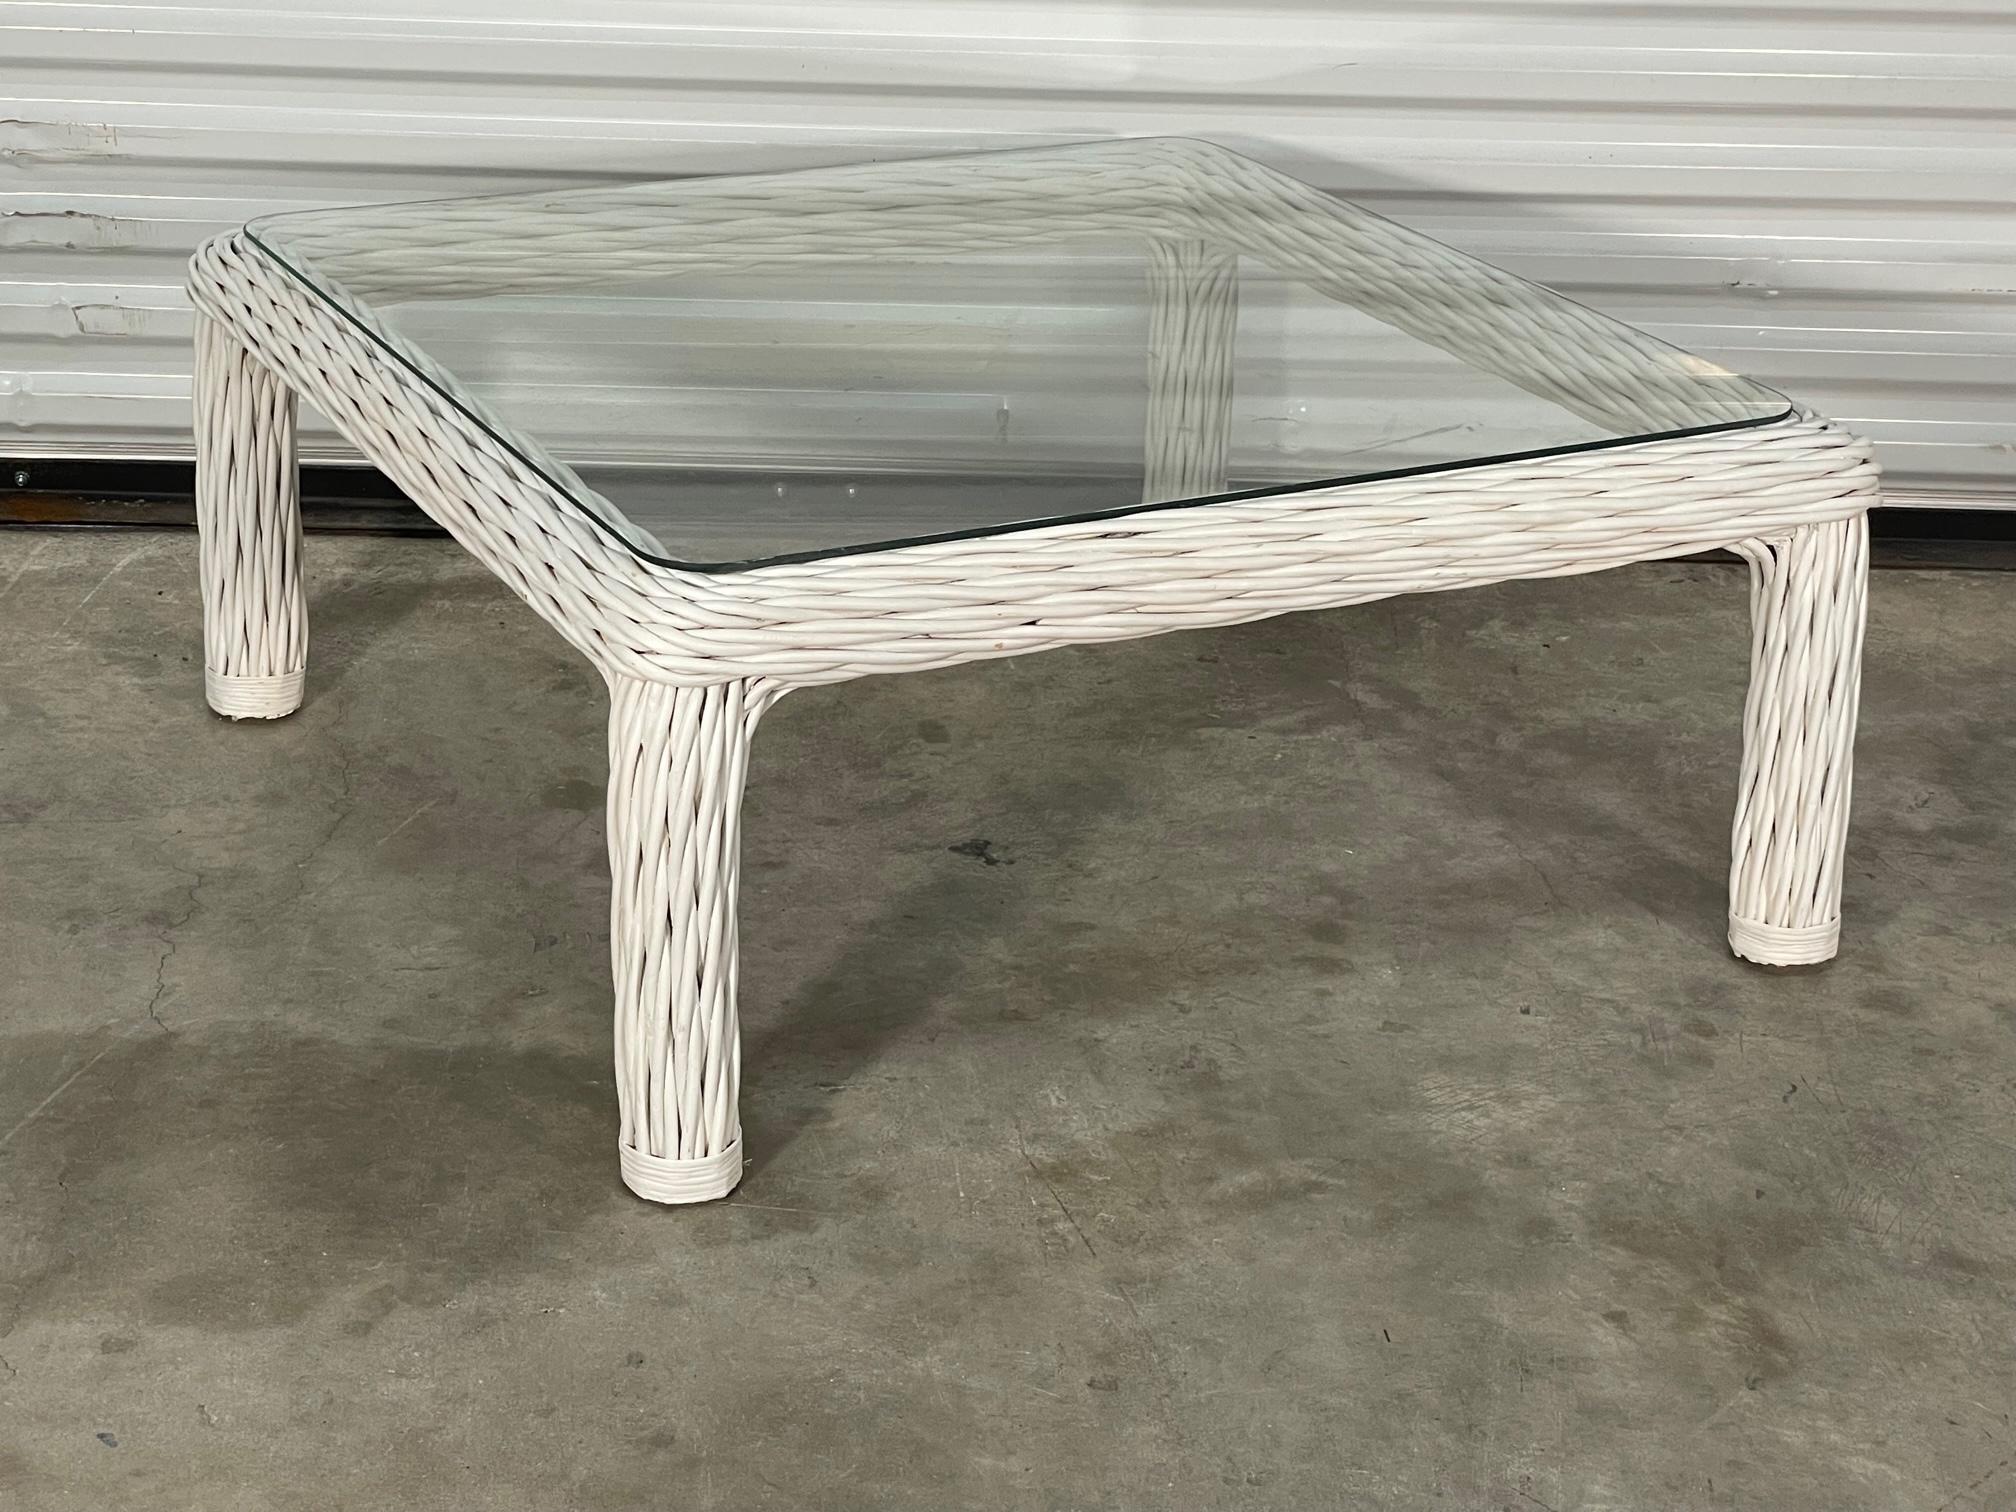 Organic modern coffee table features frame of twisted rattan and glass top. Good condition with imperfections consistent with age, see photos for condition details. We offer professional refinishing services, if interested, send us a message. 
For a